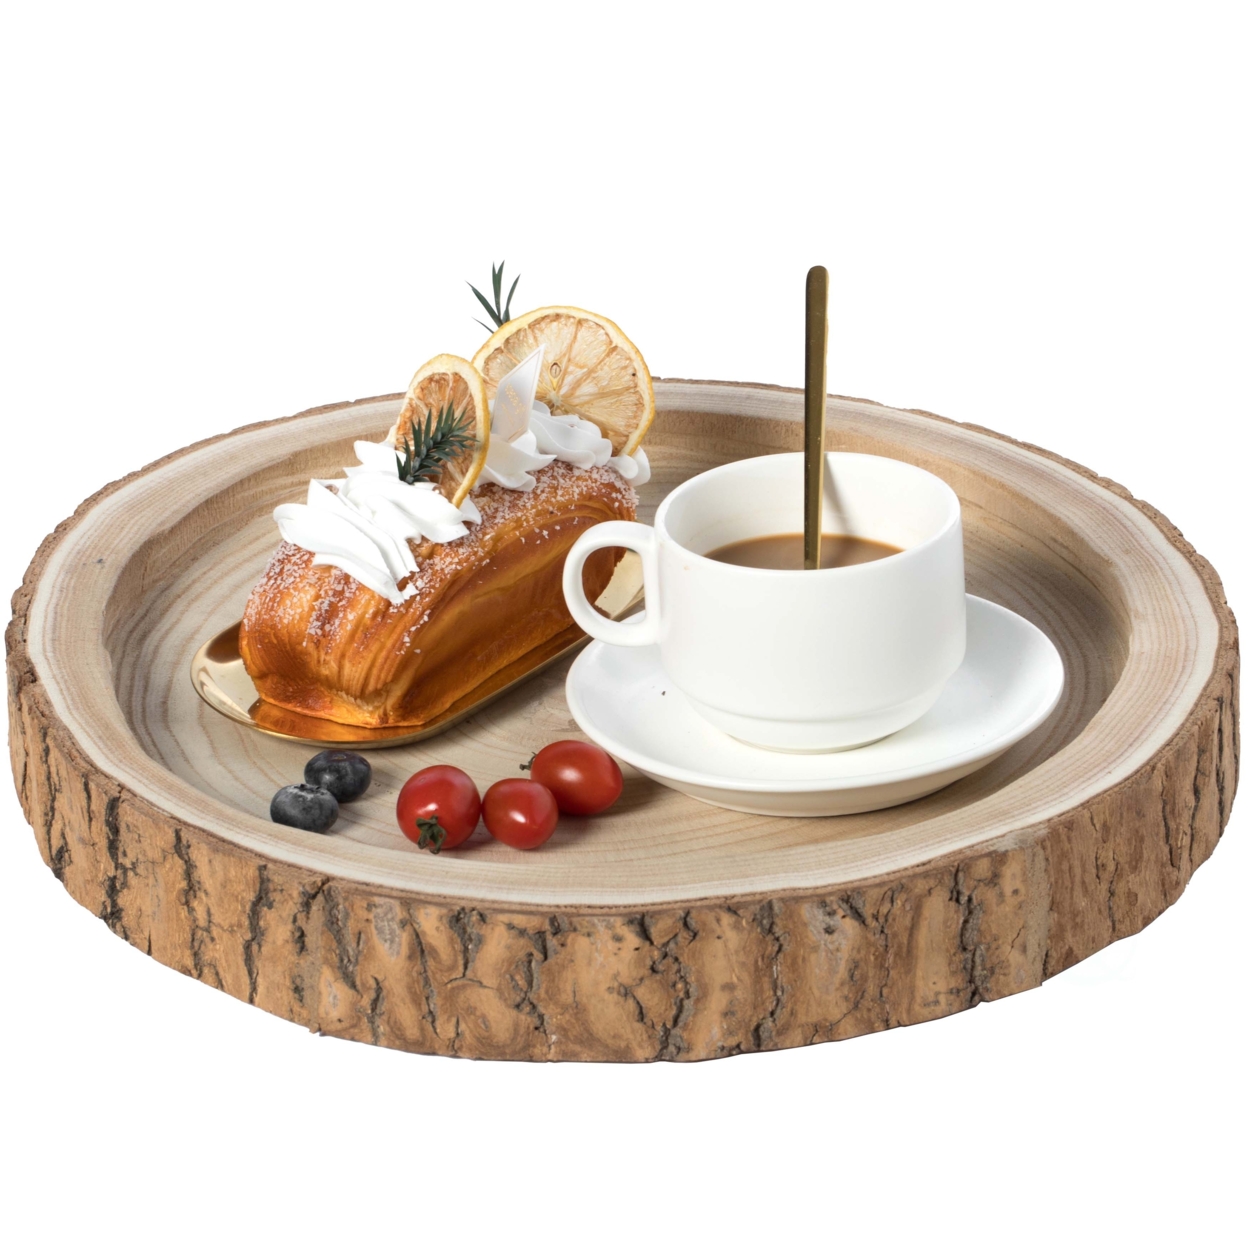 Wood Tree Bark Indented Display Tray Serving Plate Platter Charger - 14 Diameter